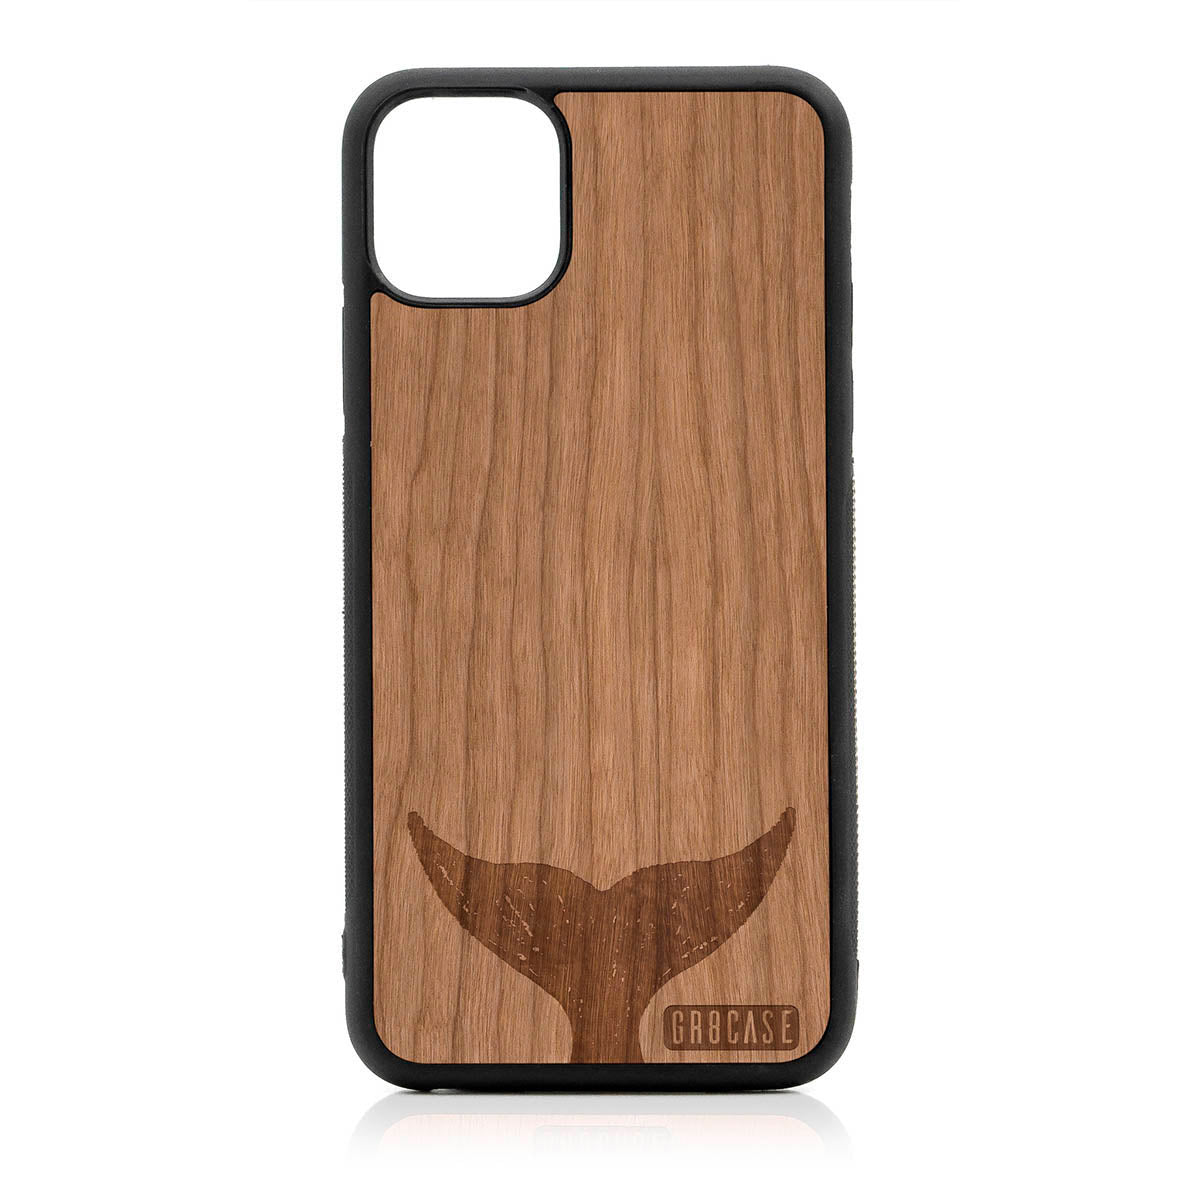 Whale Tail Design Wood Case For iPhone 11 Pro Max